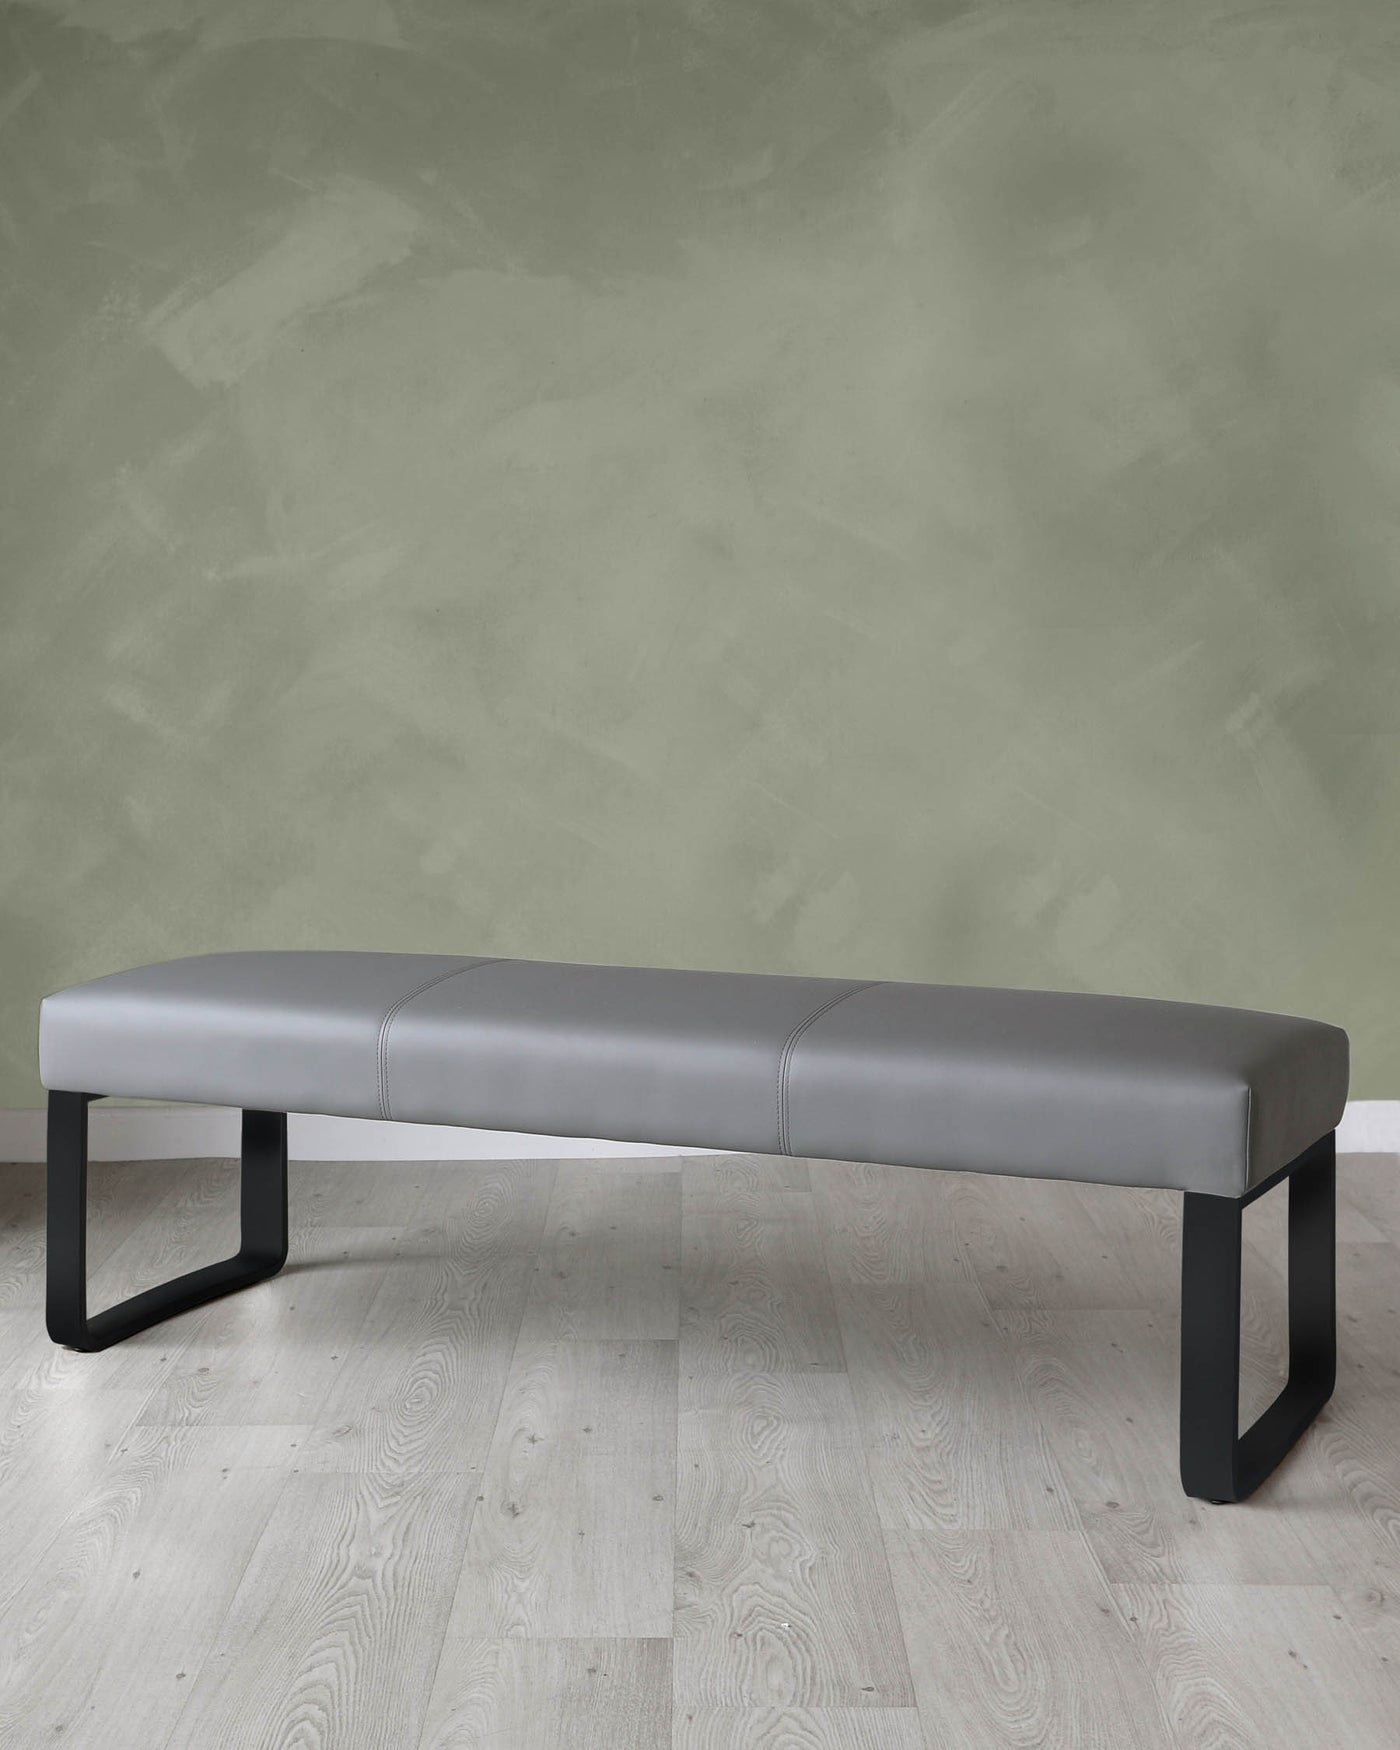 Modern grey upholstered bench with black metal legs on a light wood floor against a textured green wall.